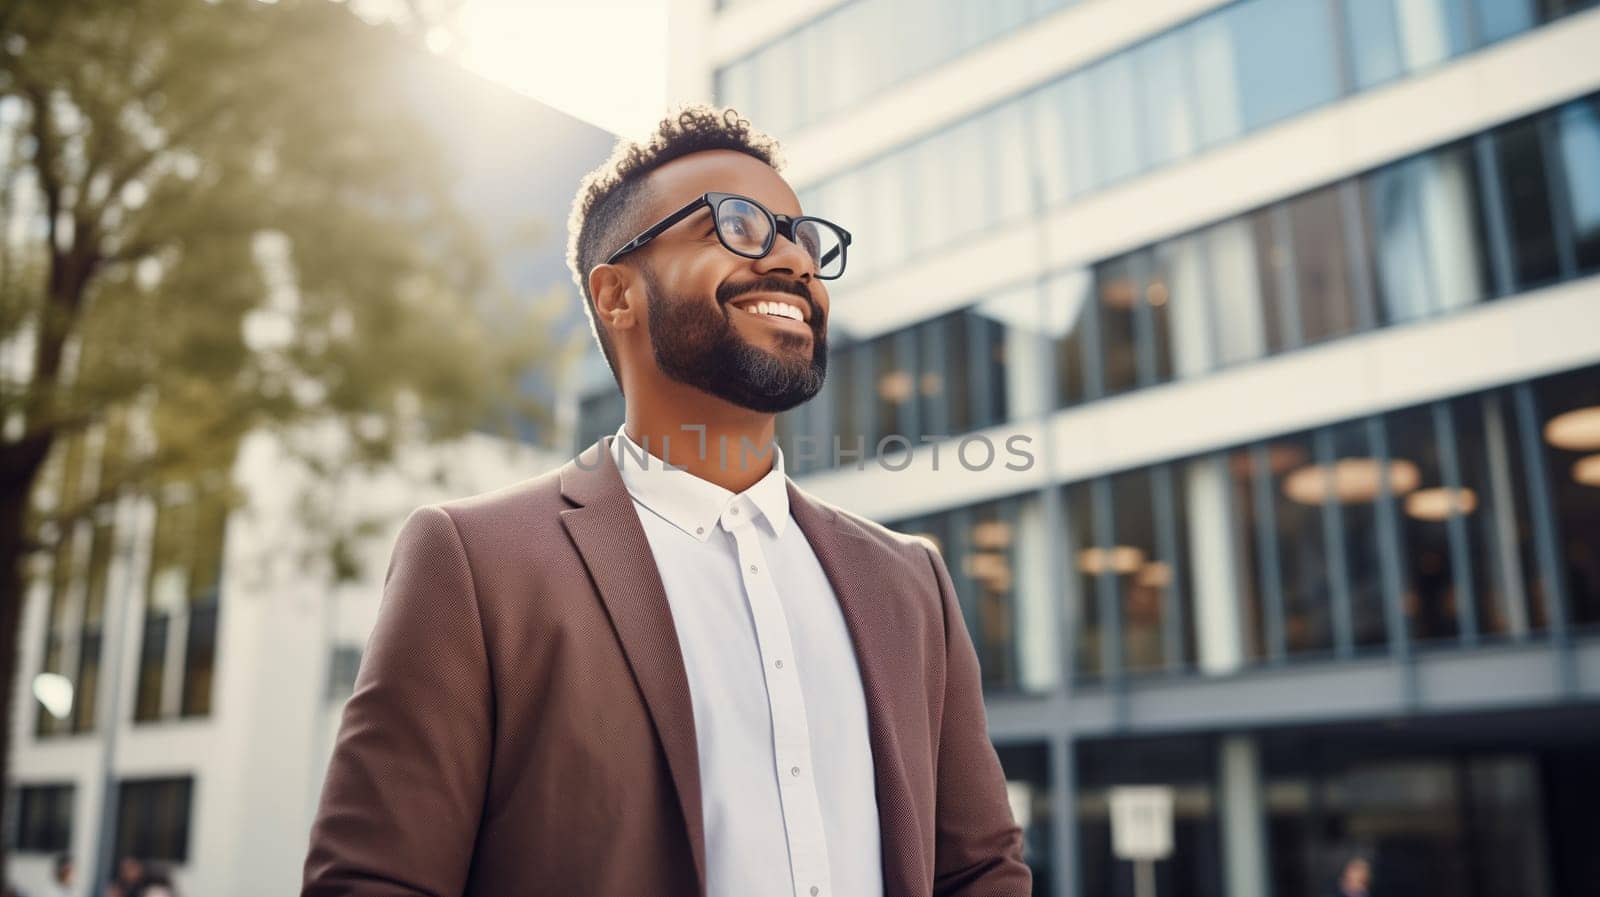 Portrait of confident happy smiling black entrepreneur standing in the city, wearing glasses, brown business suit, looking away